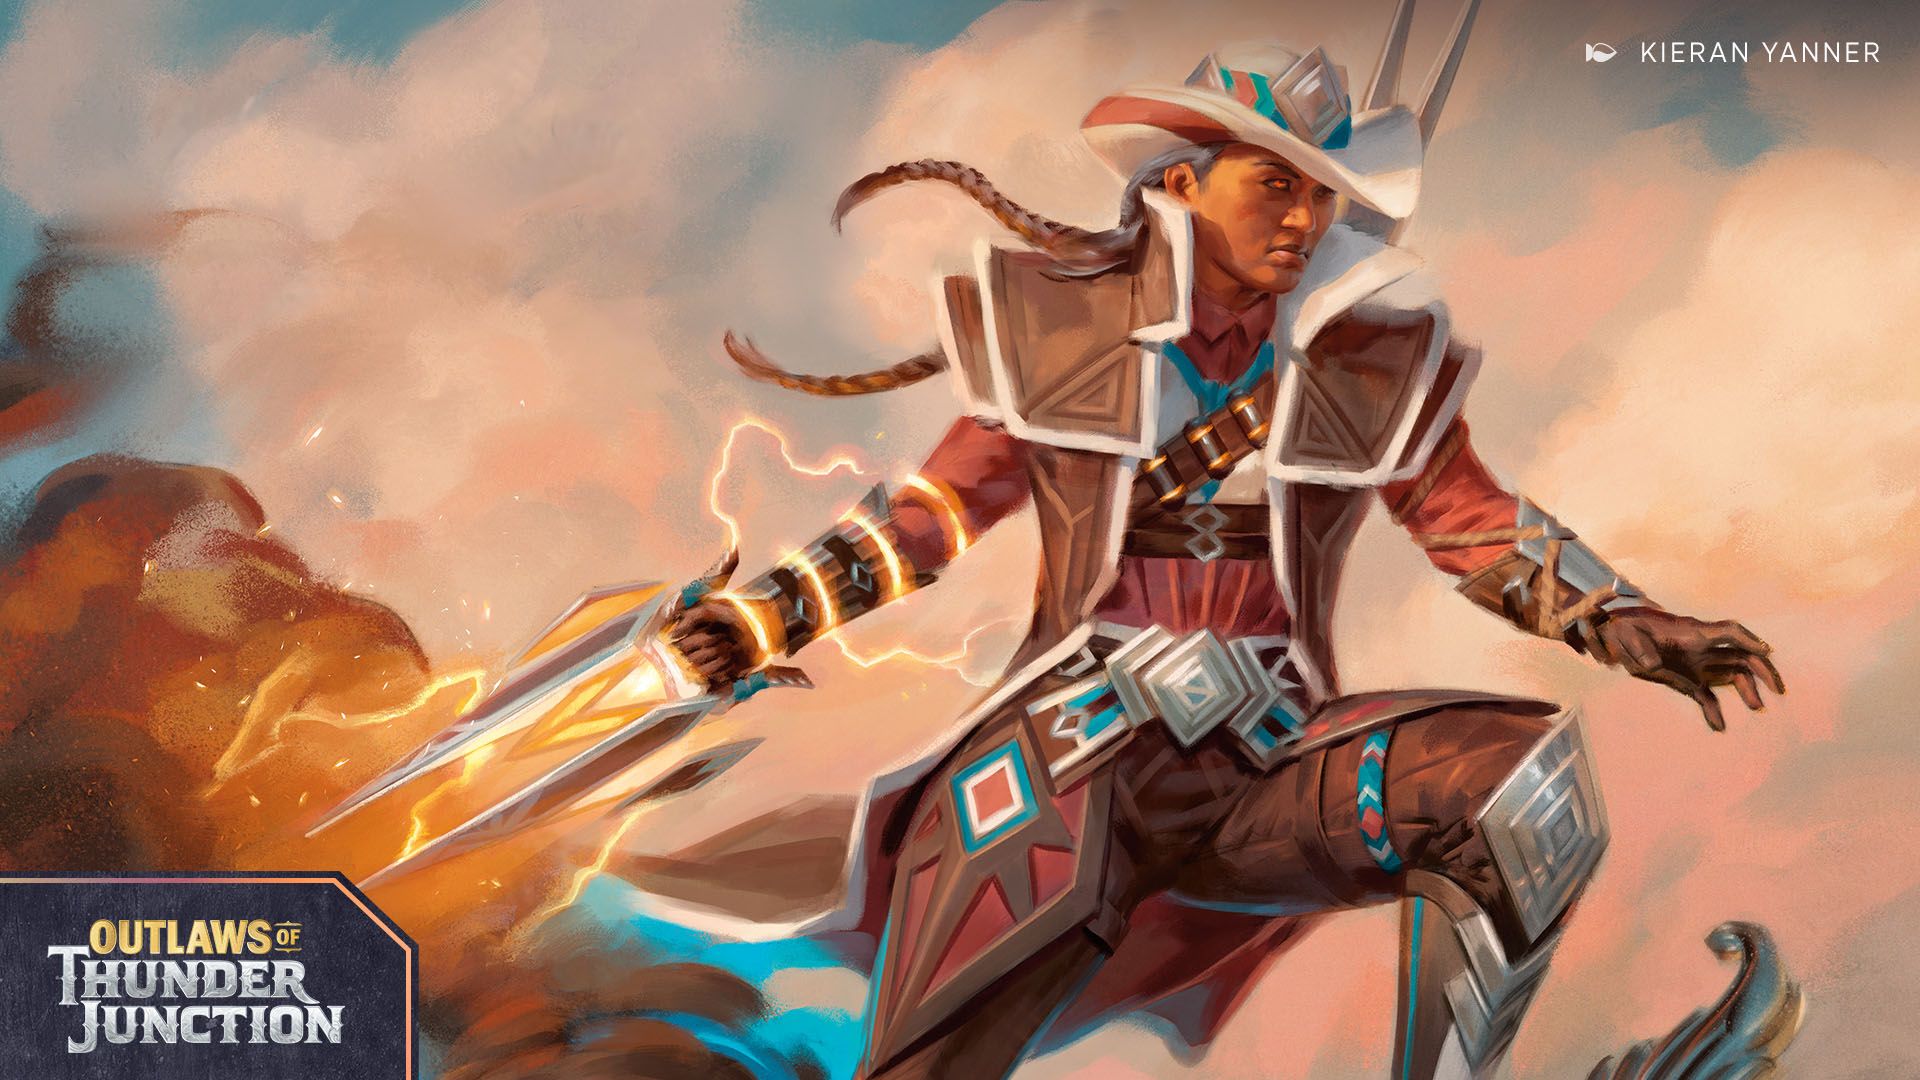 Magic The Gathering Reveals The Wild WestThemed Outlaws Of Thunder